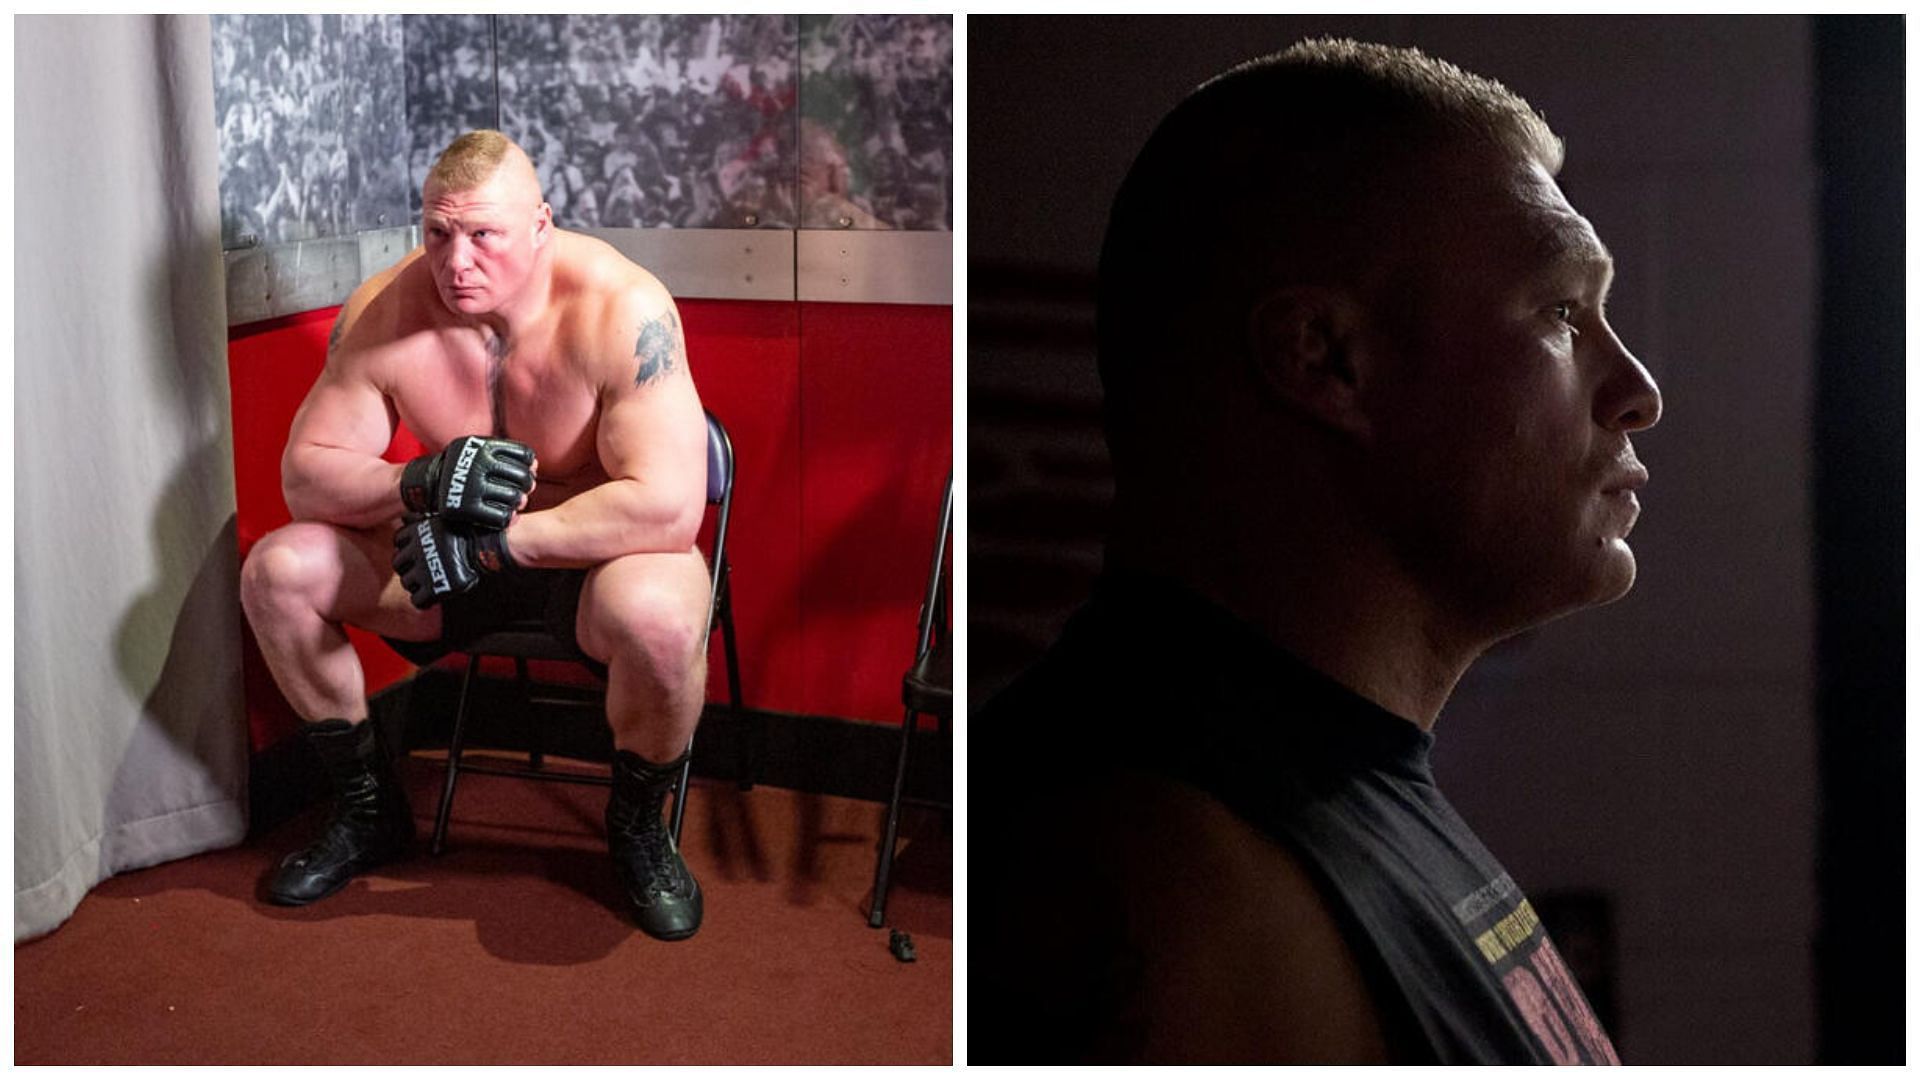 Brock Lesnar is a former WWE Universal Champion.